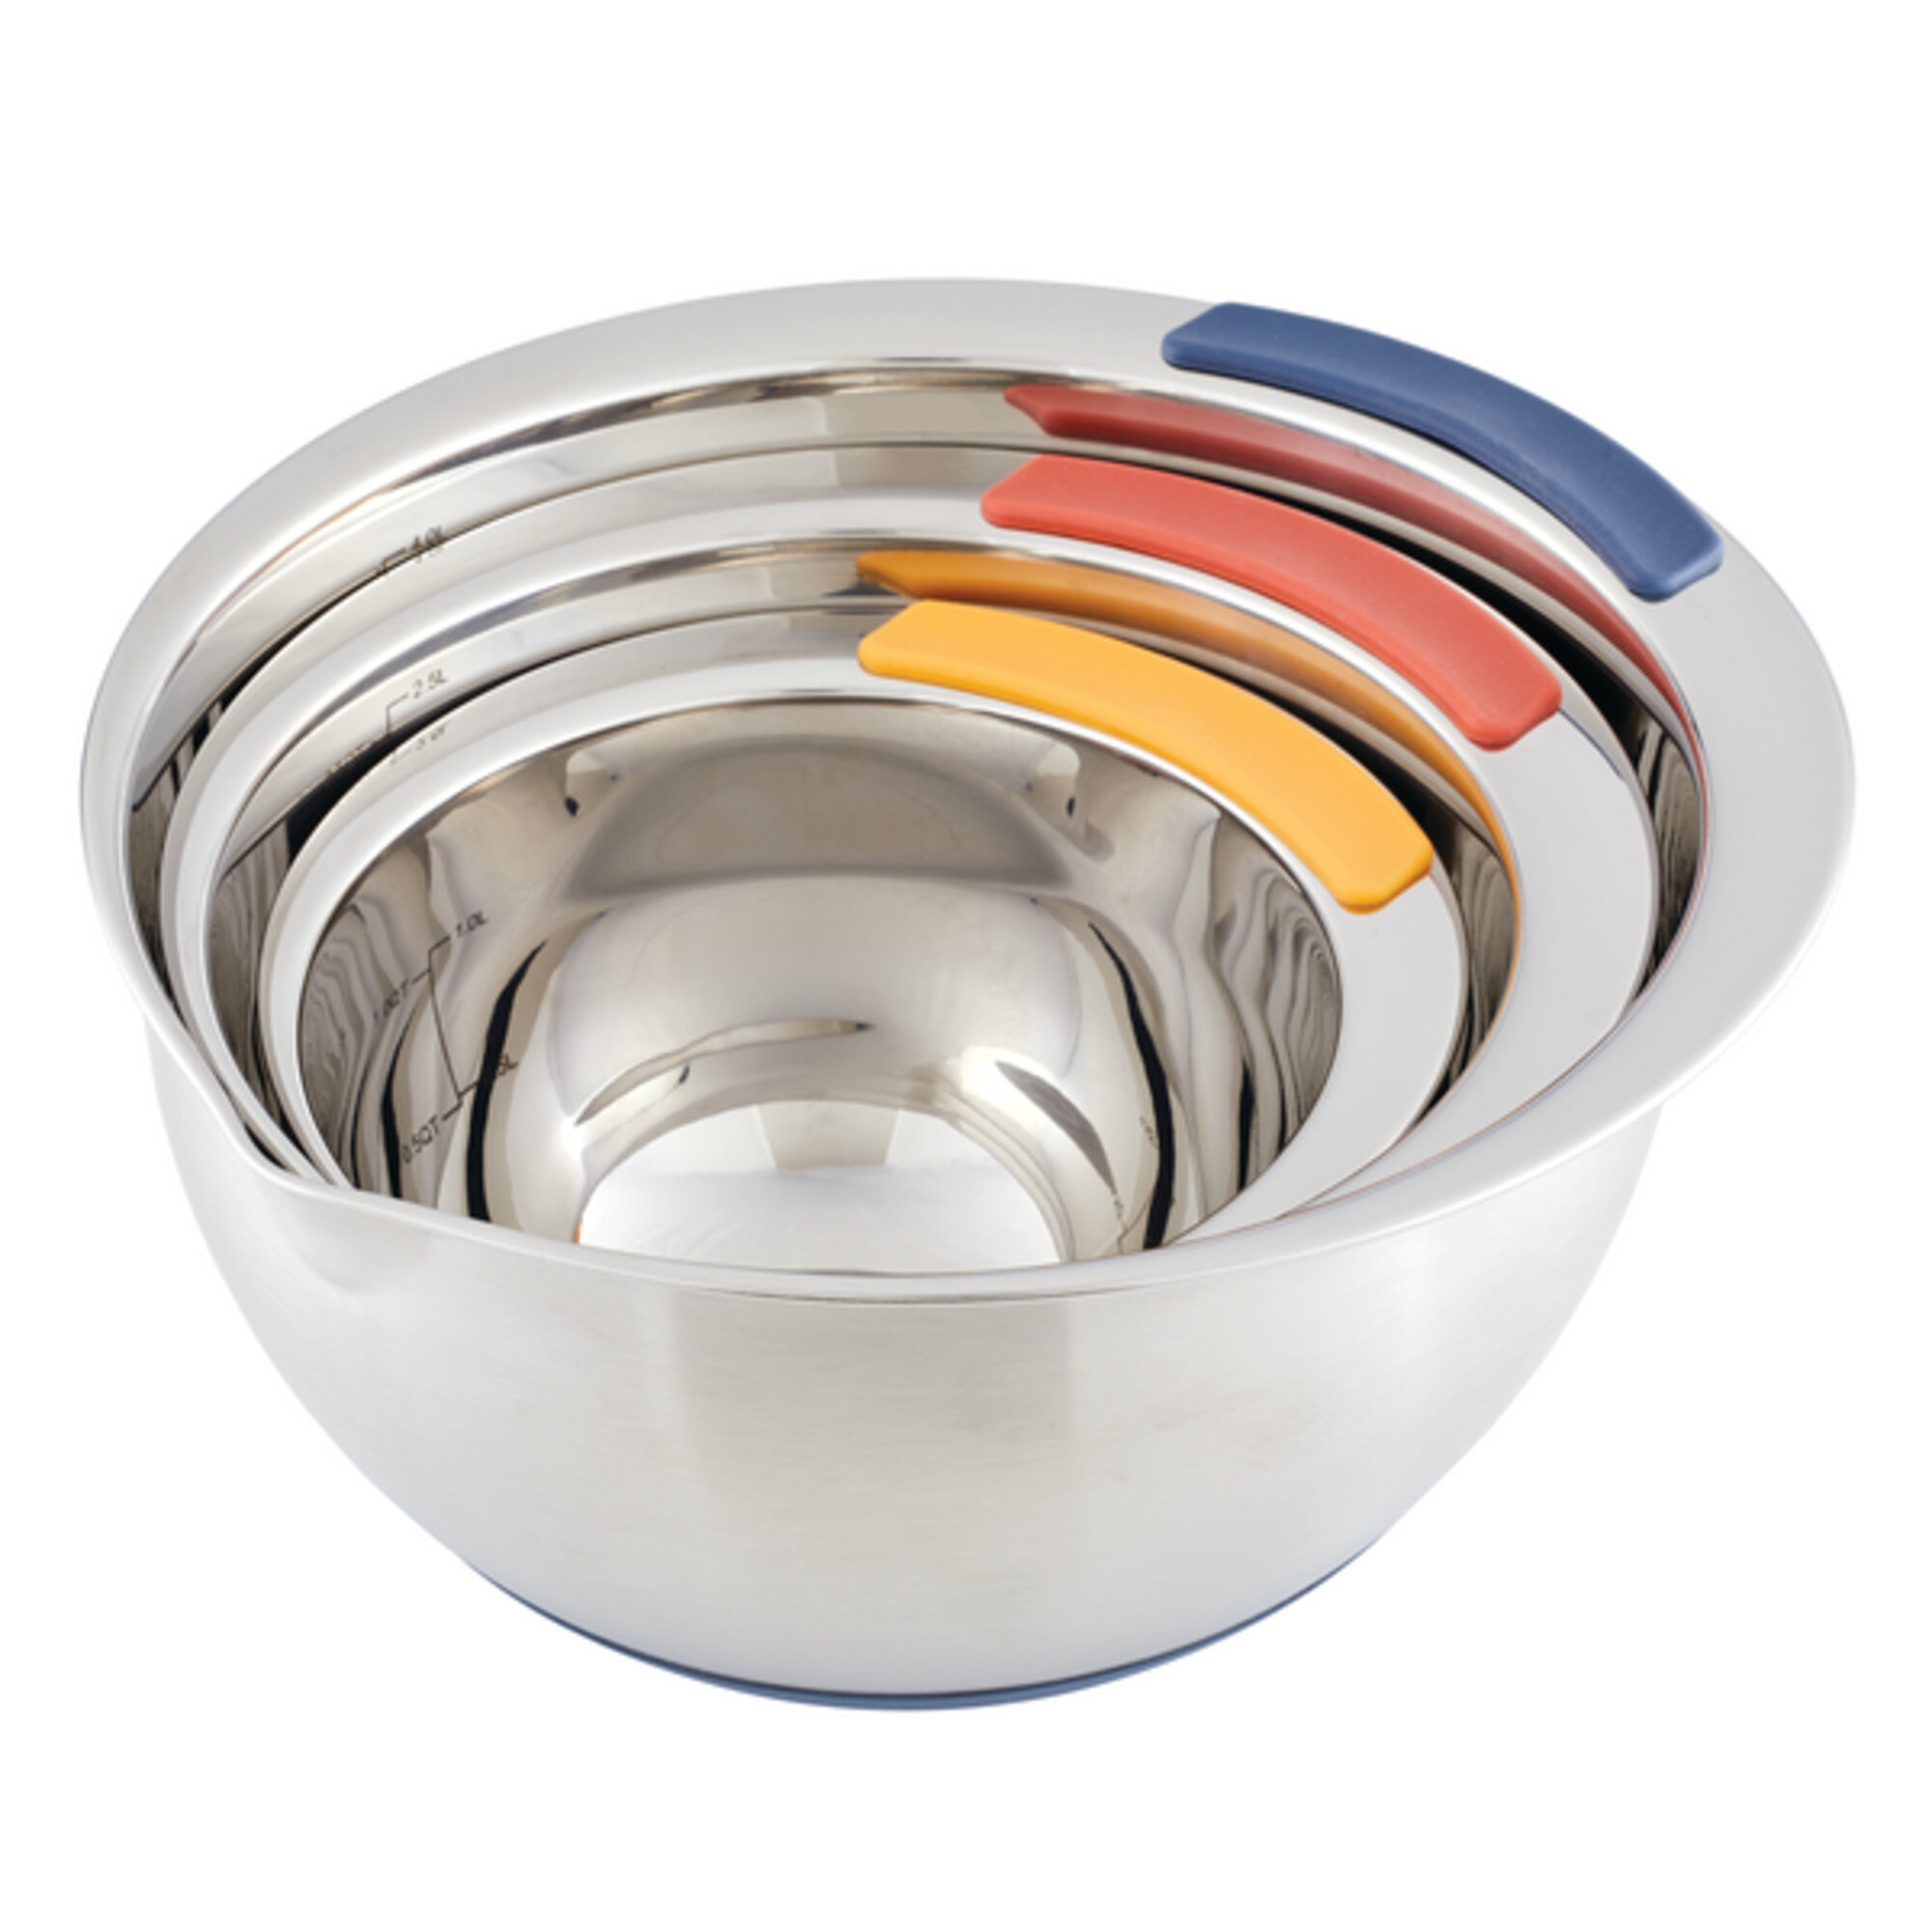 Cuisinart Set of 3 Stainless Steel Mixing Bowls with Non-Slip Base